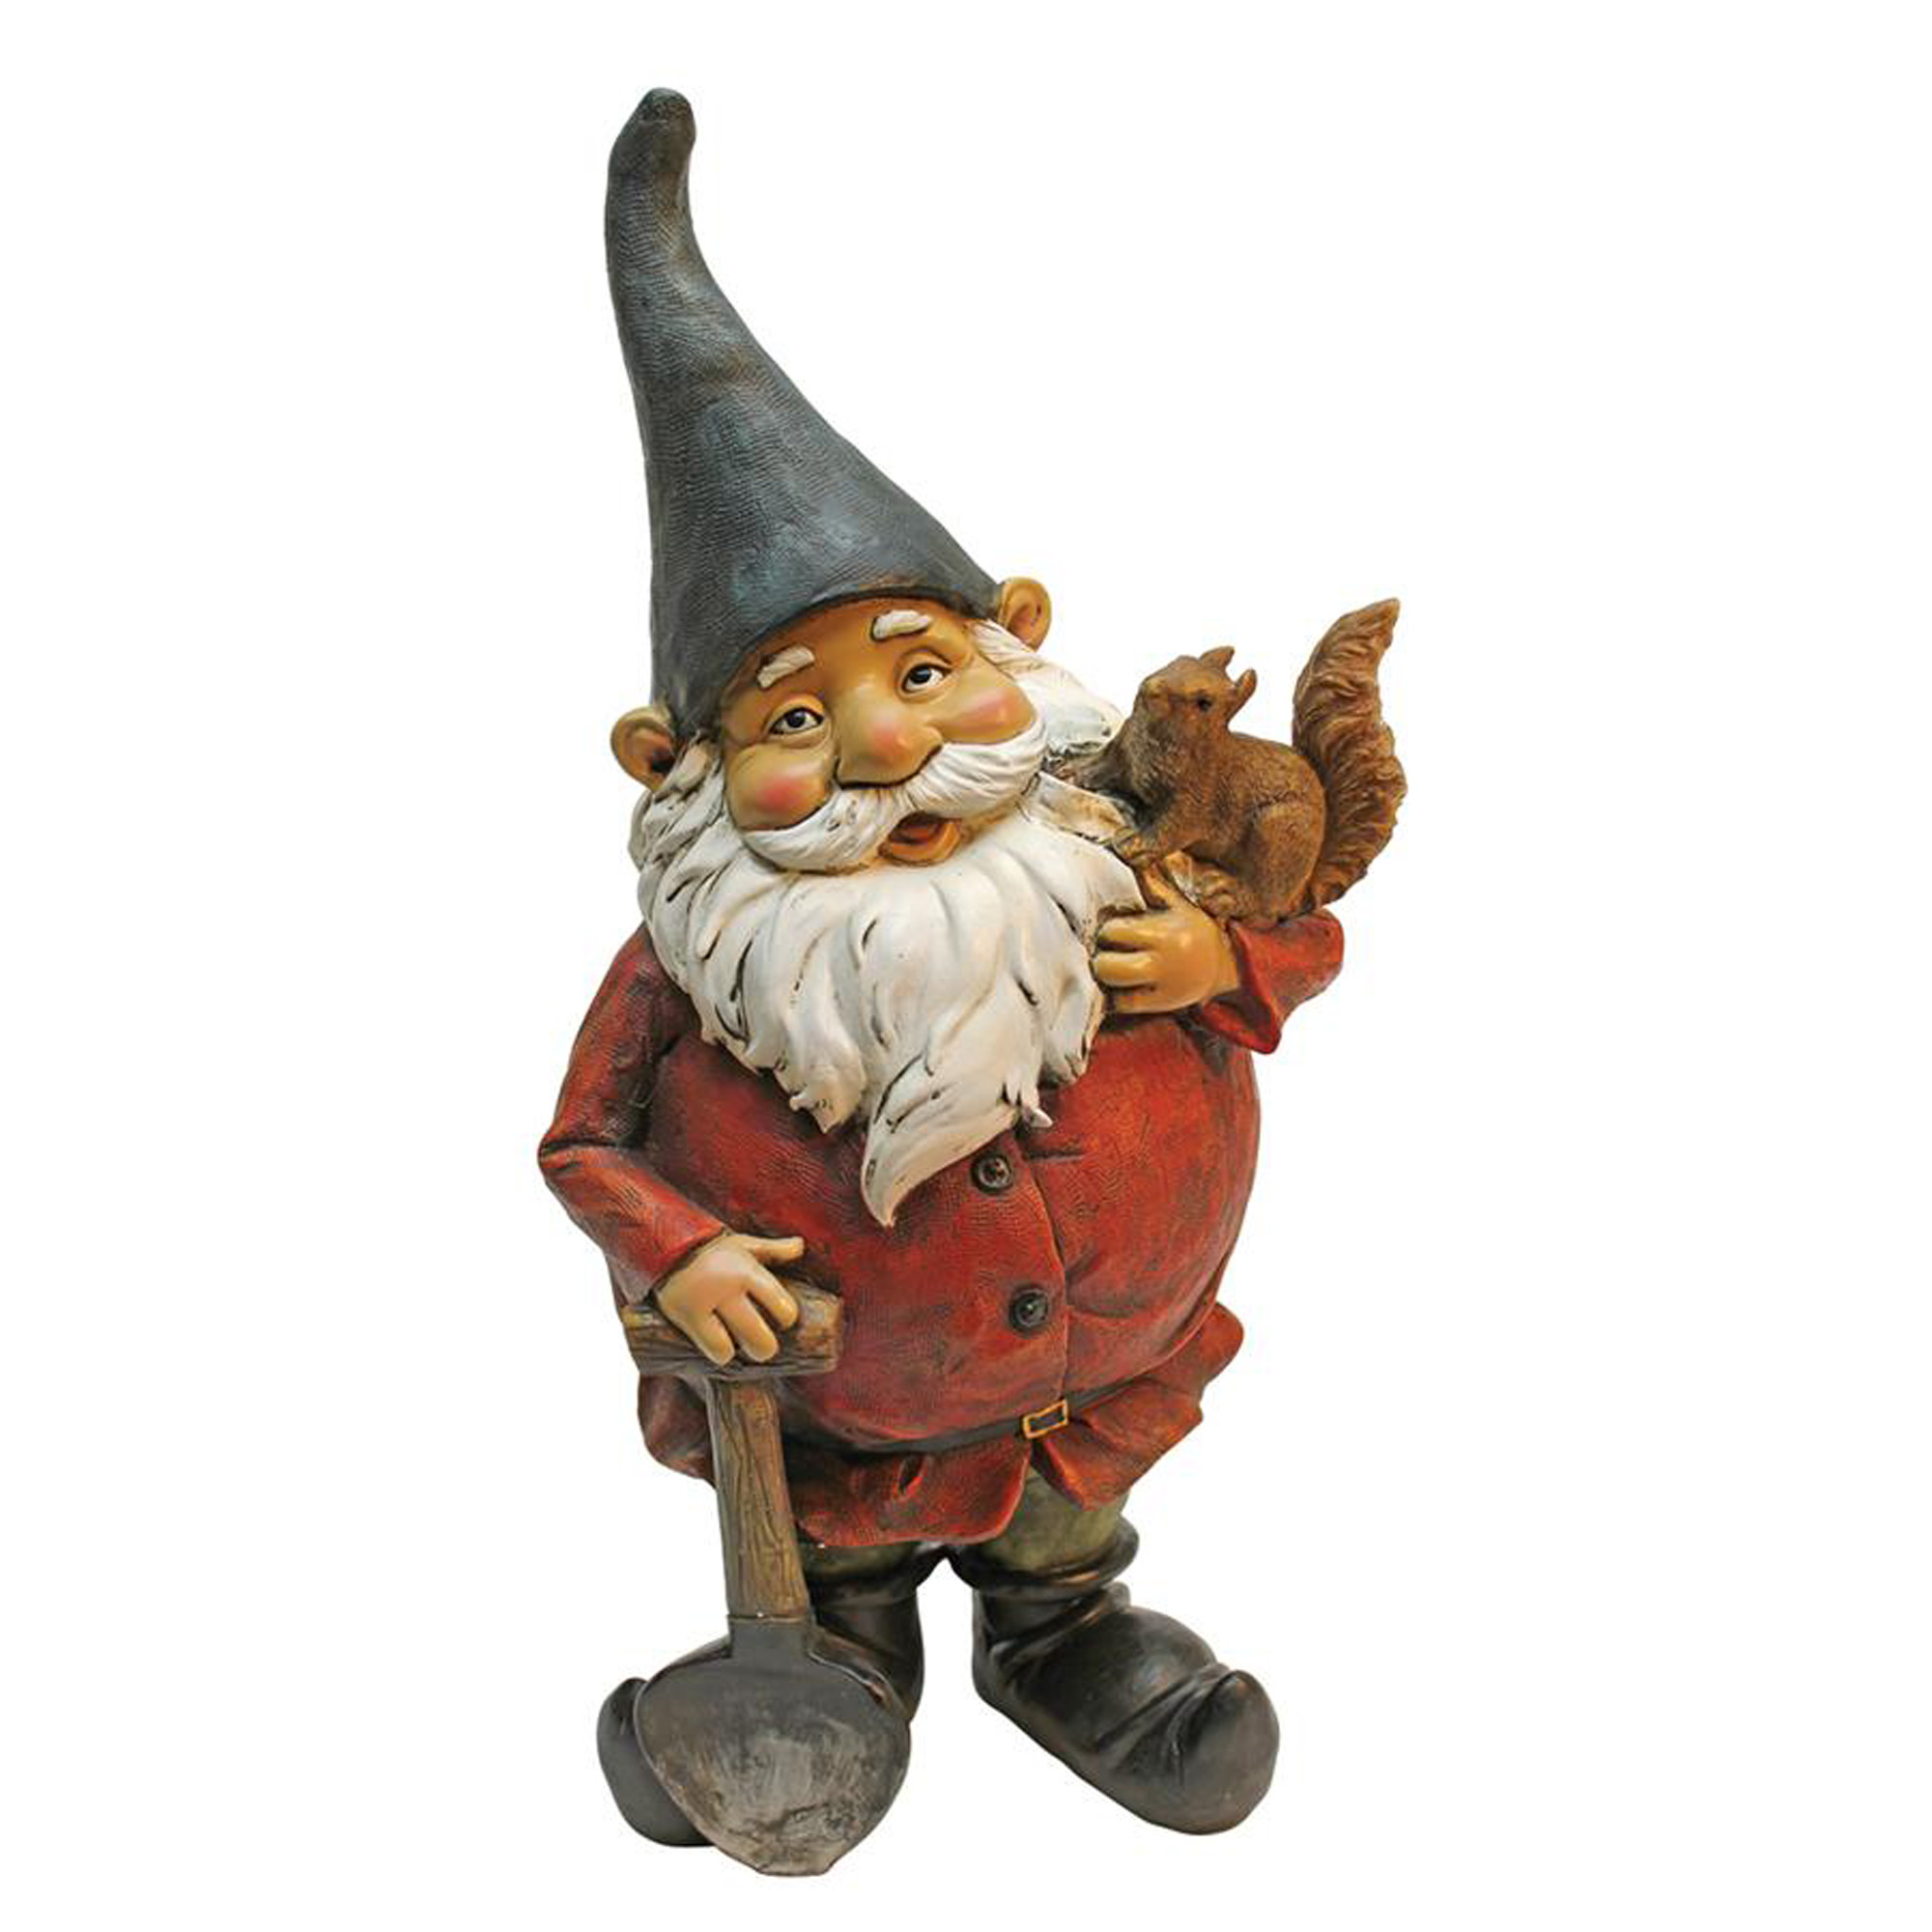 Outdoor Living and Style 17" Digger Gnome Hand Painted Outdoor Garden Statue